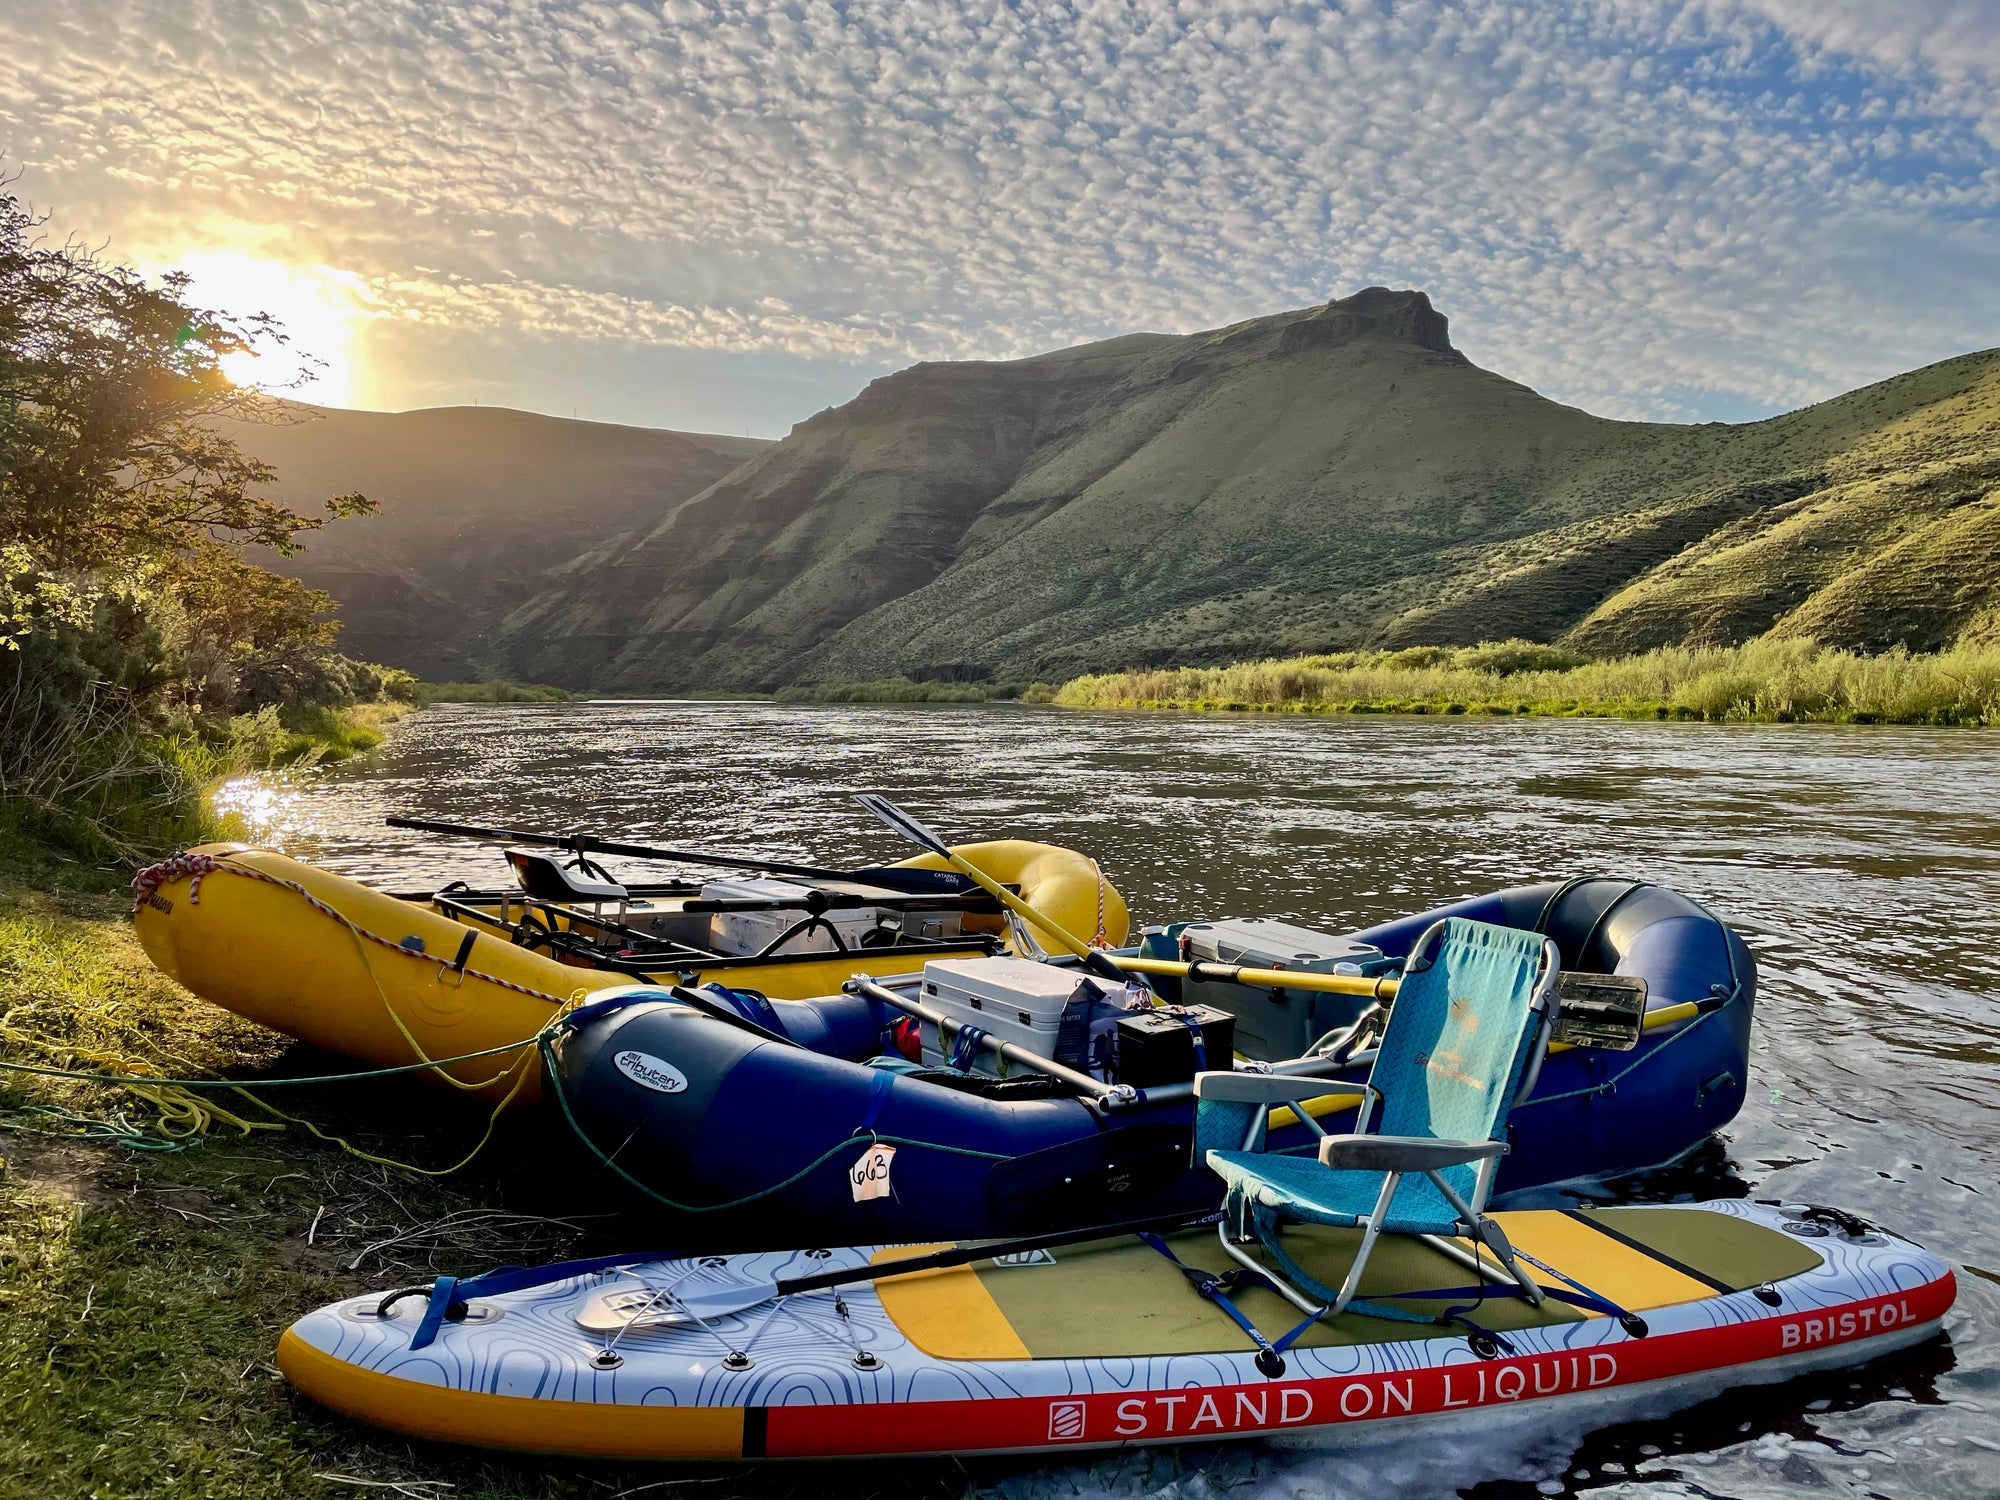 Bristol inflatable stand up paddle board by stand on liquid set up as a fishing SUP on the John Day river in Oregon